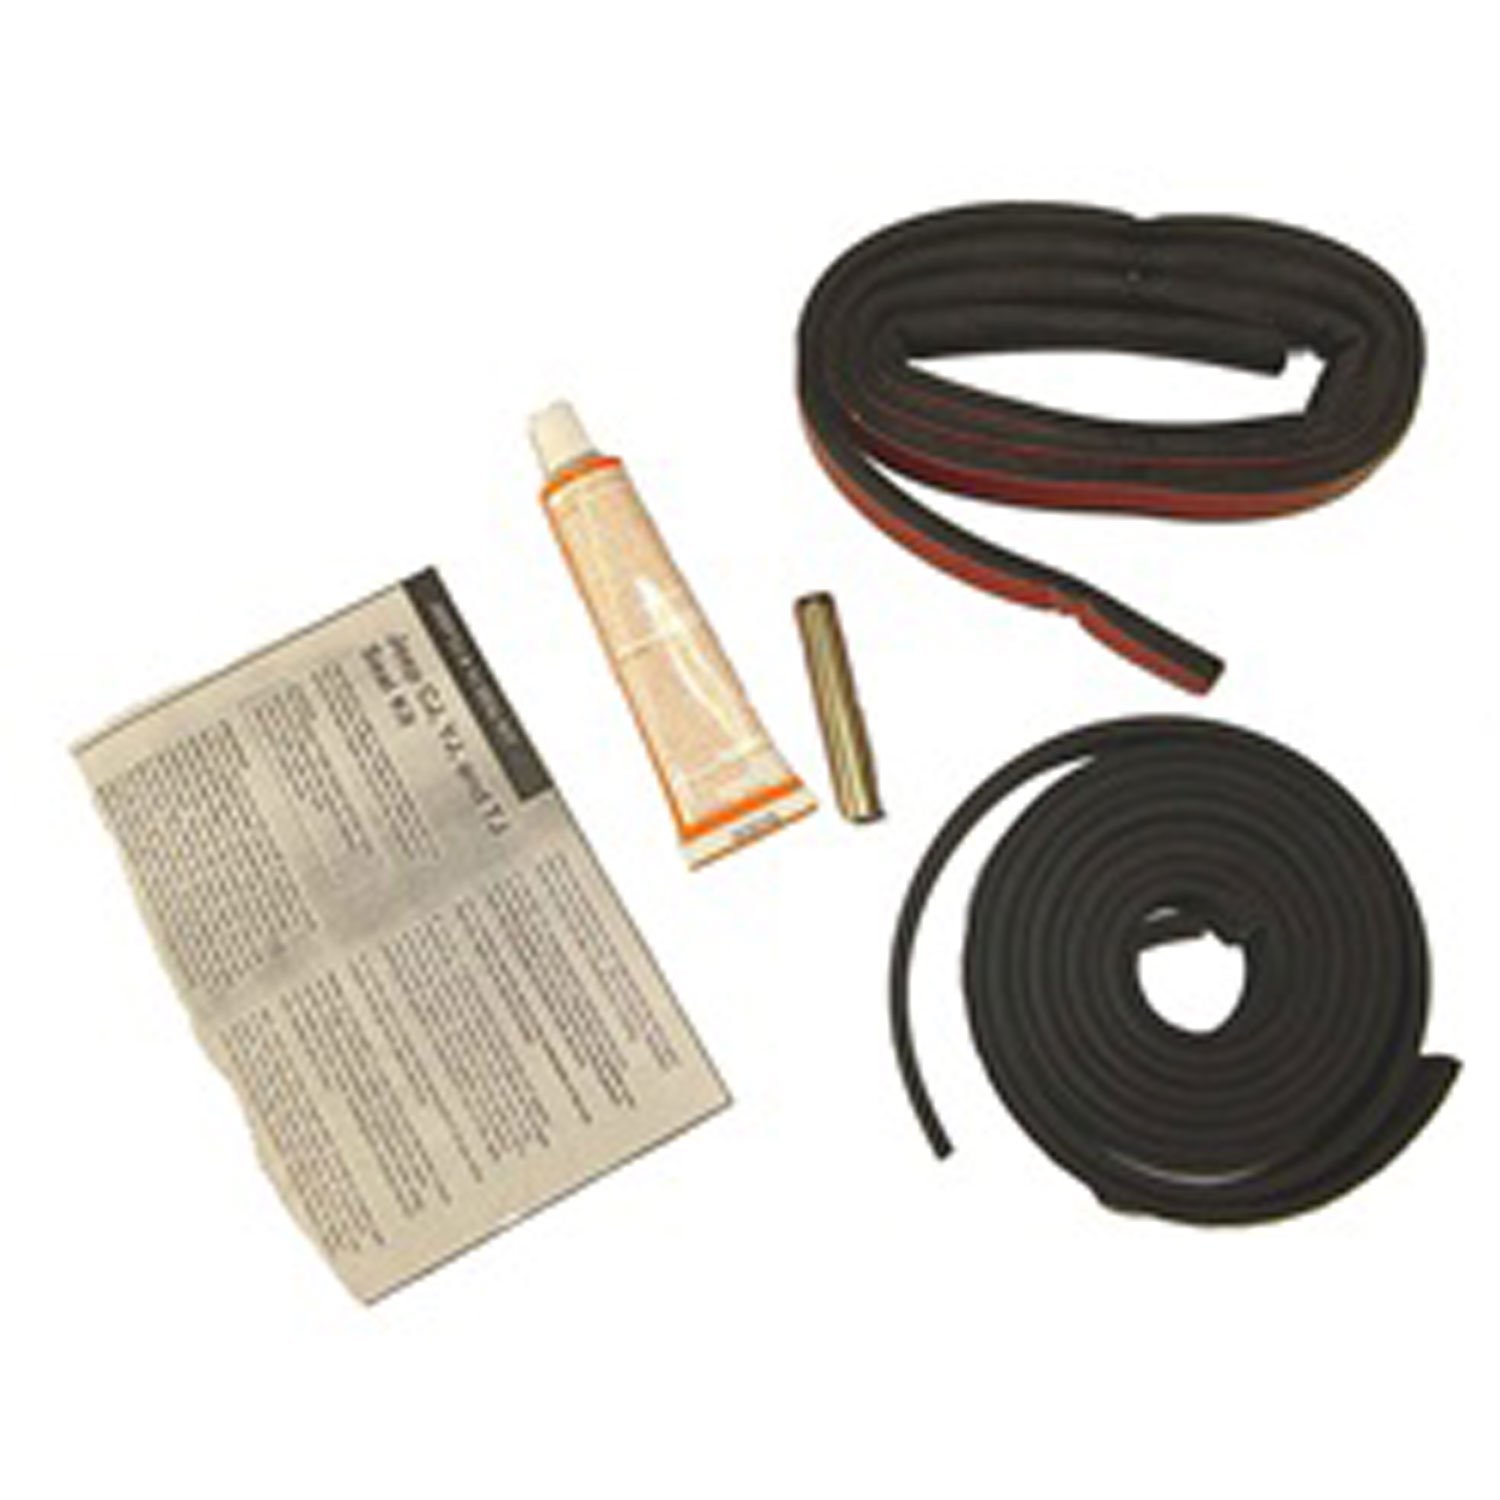 This hardtop seal kit from Omix-ADA fits 76-86 CJ 87-95 YJ and 97-06 TJ